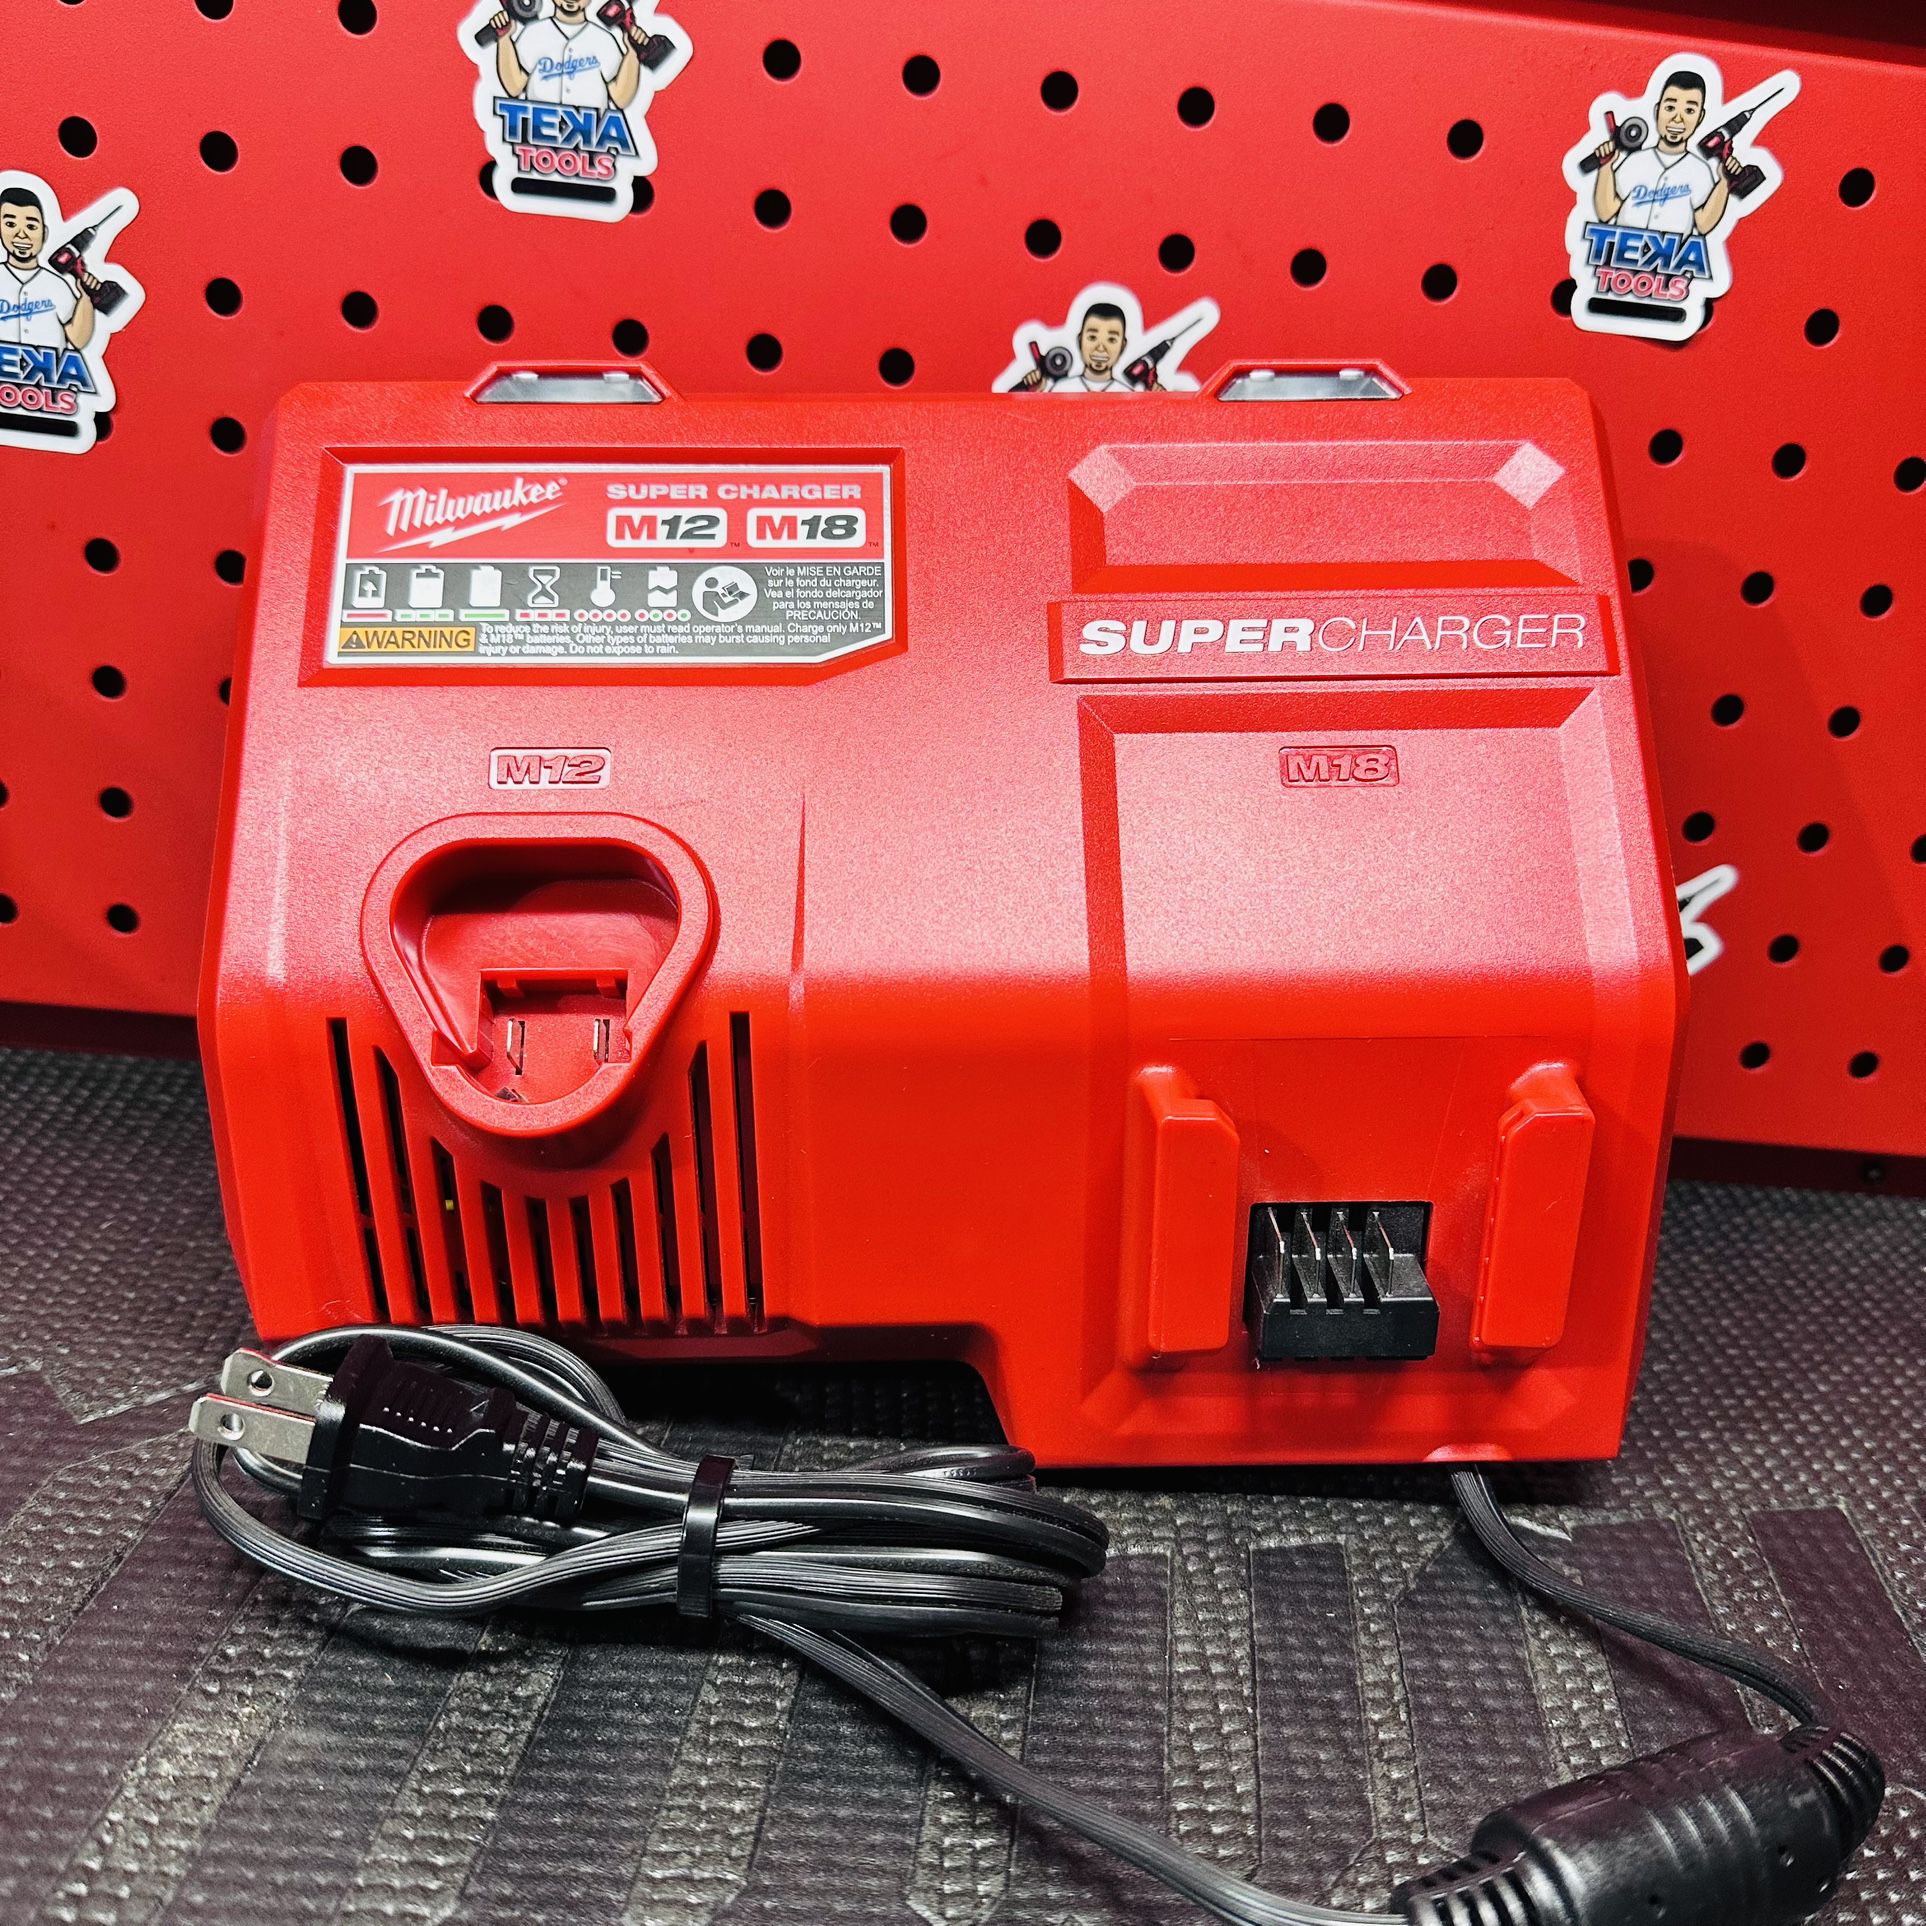 Milwaukee M12 and M18 12-Volt/18-Volt Lithium-Ion Multi-Voltage Super  Charger Battery Charger for Sale in Lamont, CA OfferUp